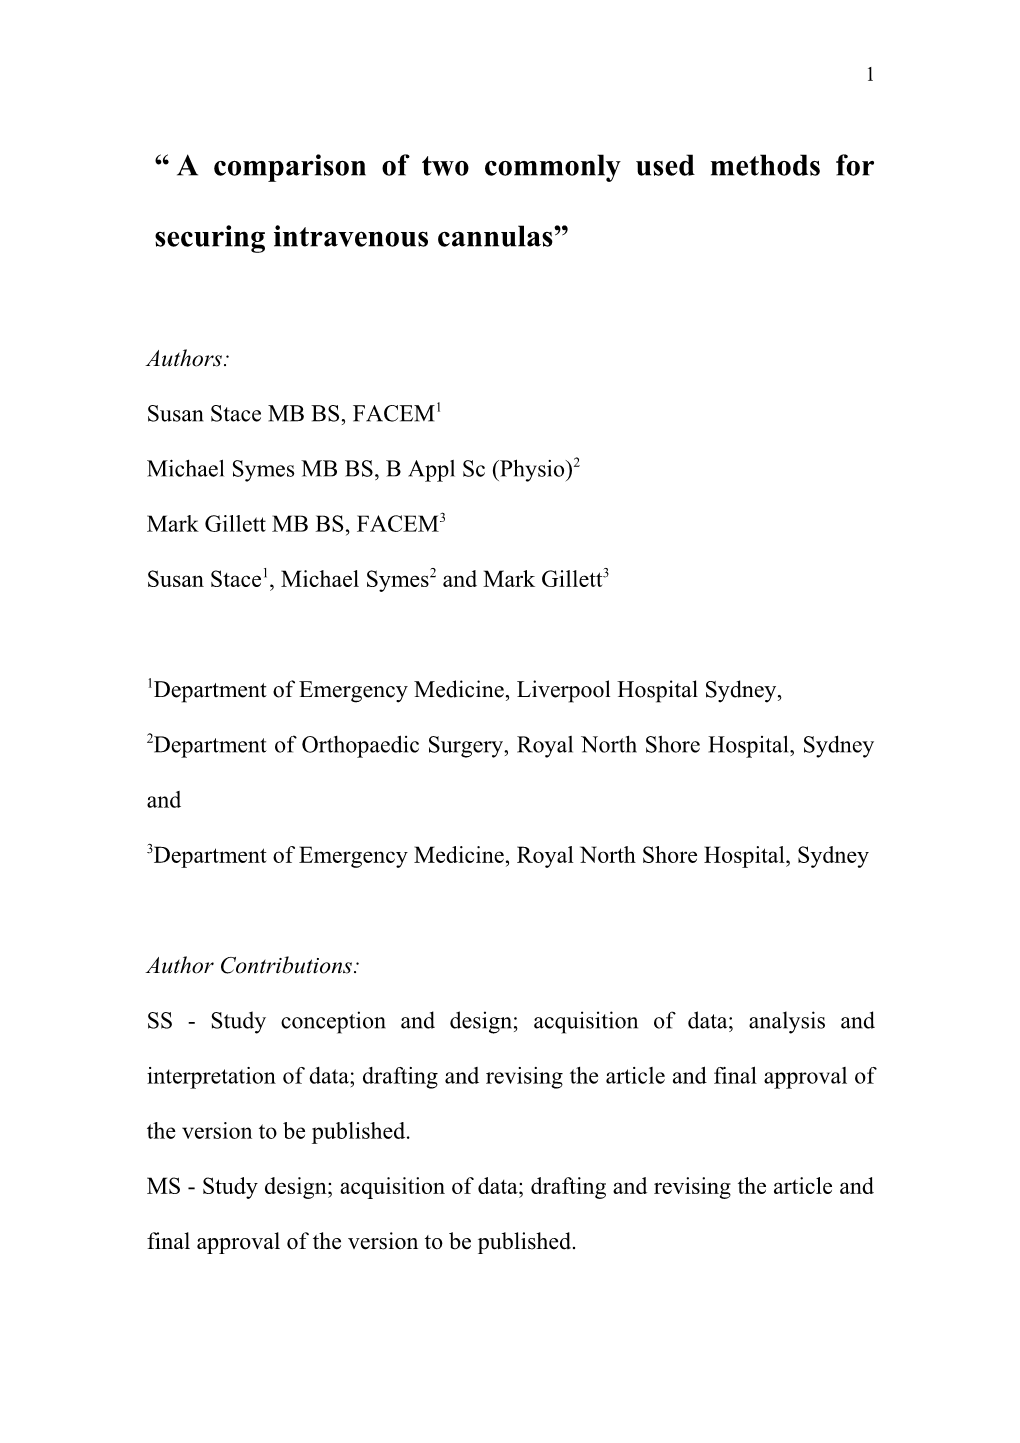 Title: Comparison of Two Commonly Used Methods for Securing Intravenous Cannulas